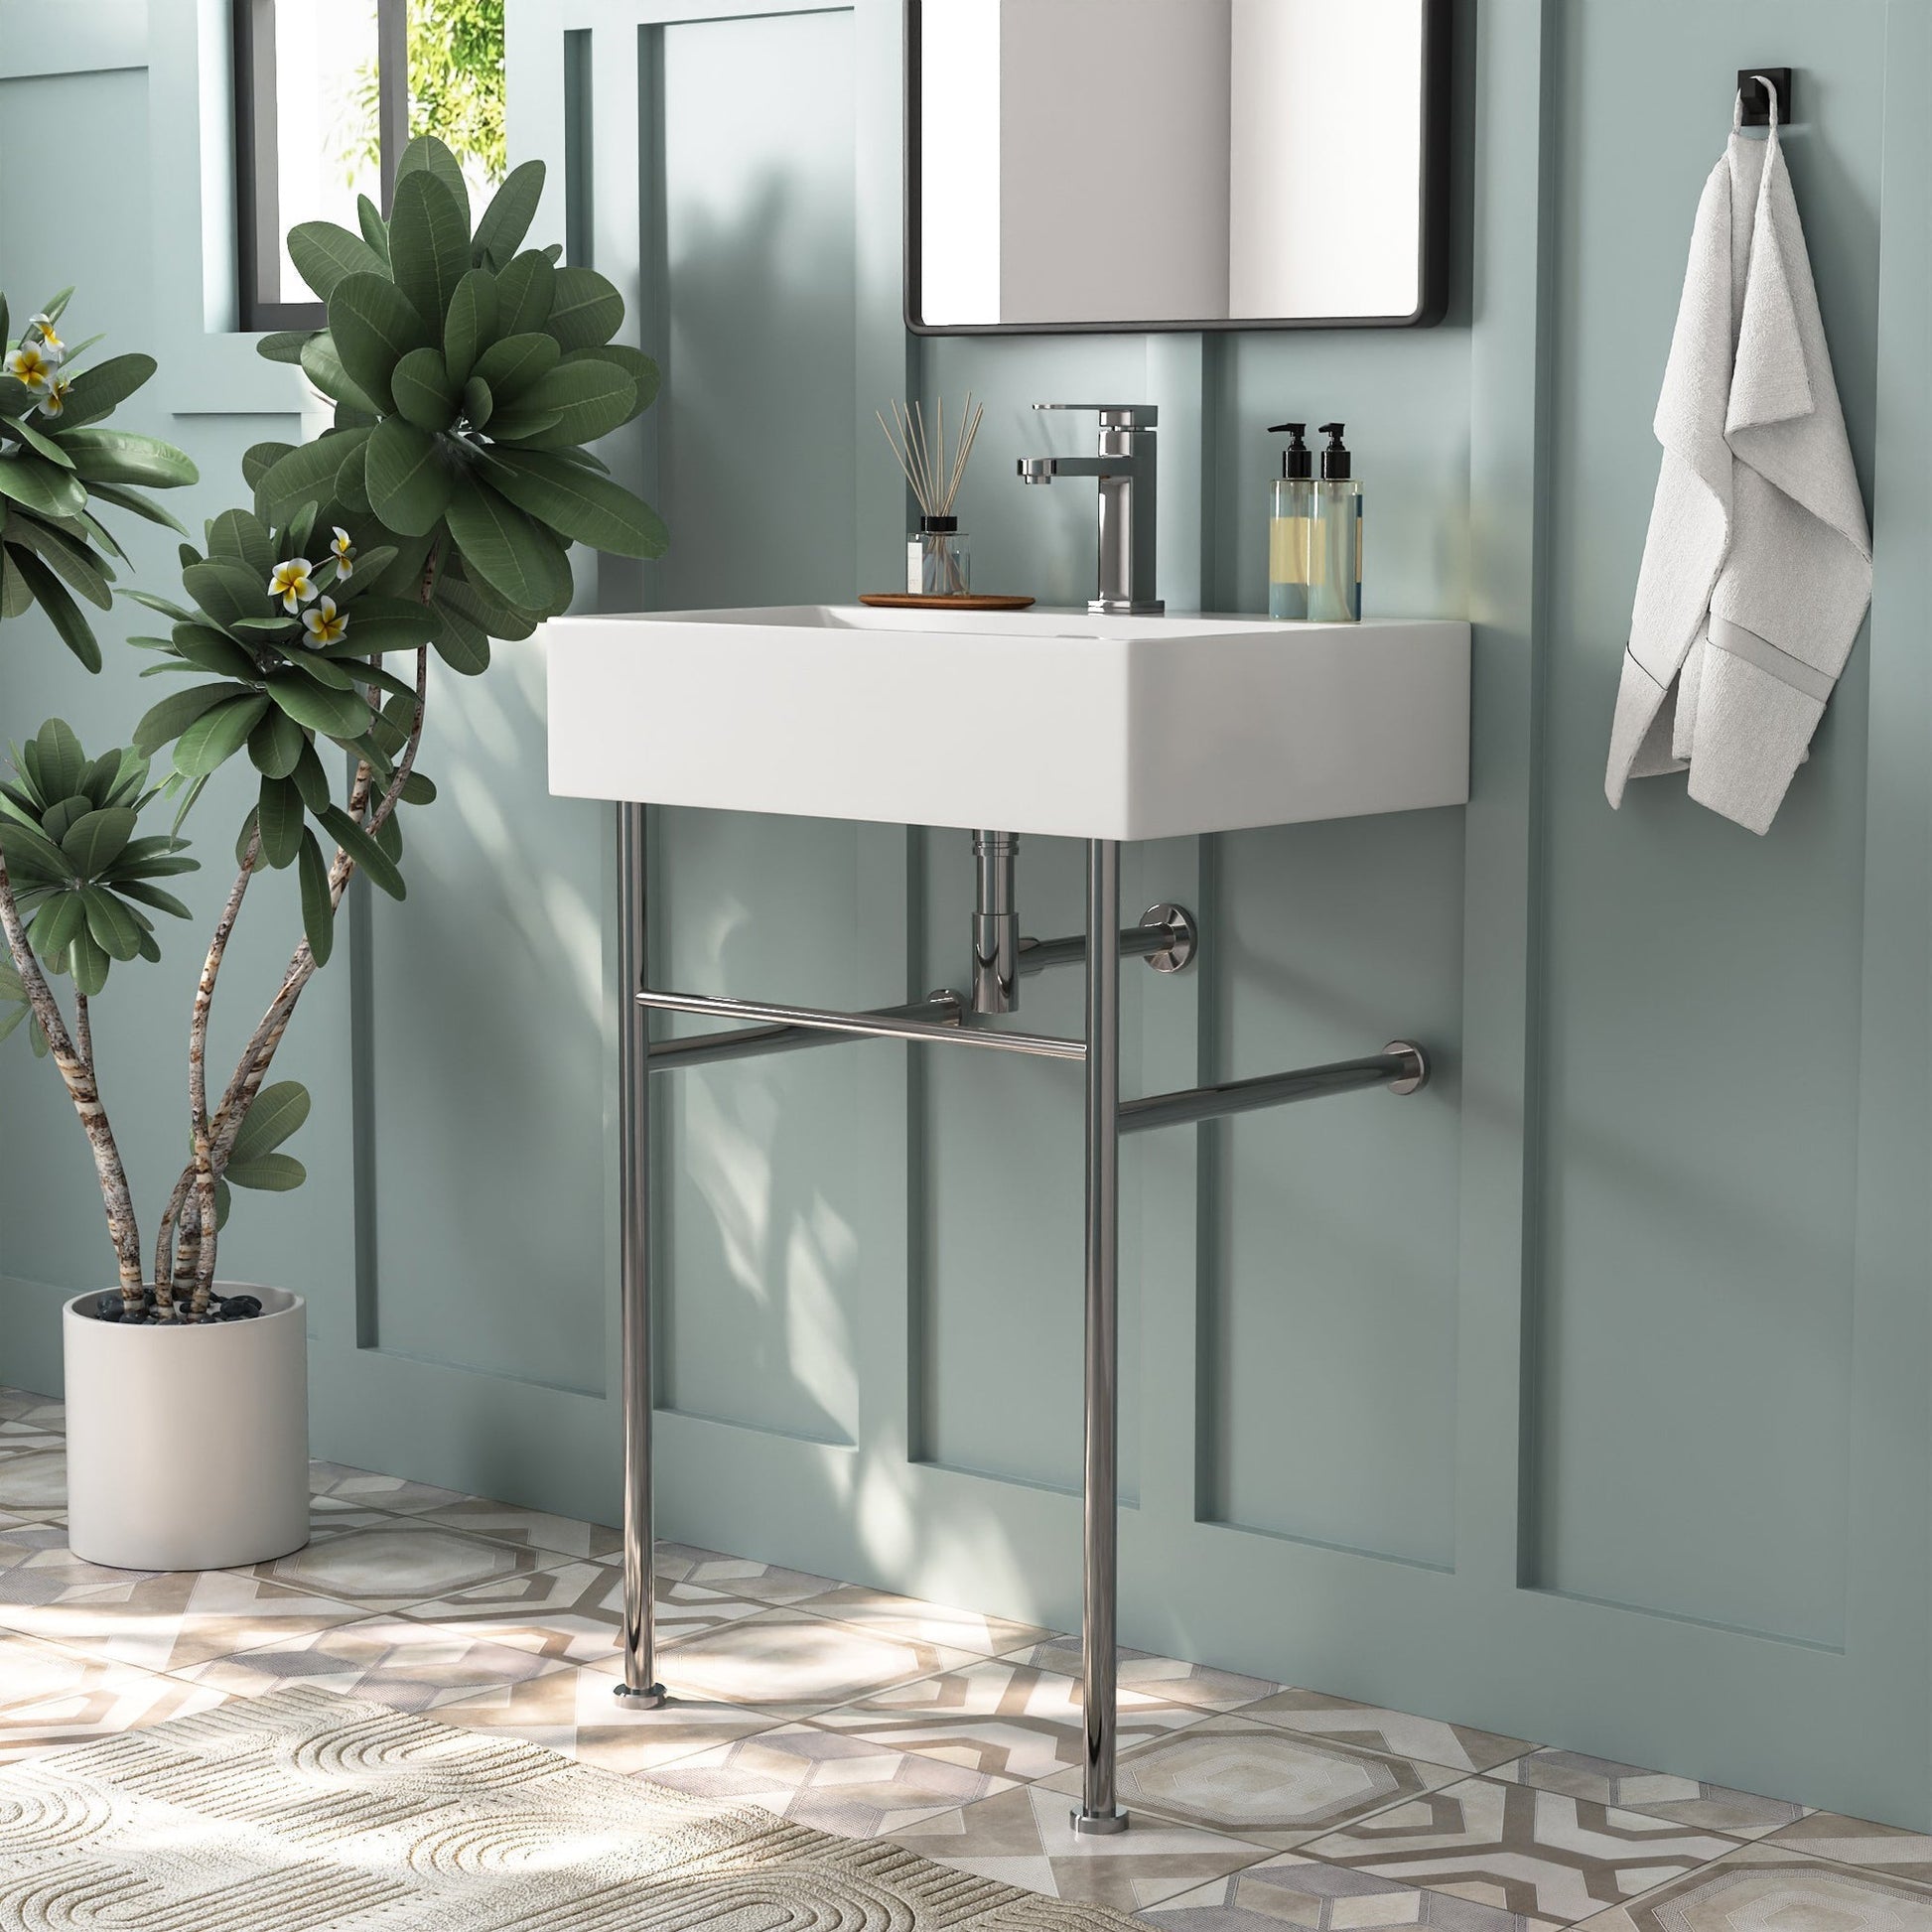 DeerValley 24" Rectangular White Ceramic Console Bathroom Sink With Silver Legs and Single Faucet Hole